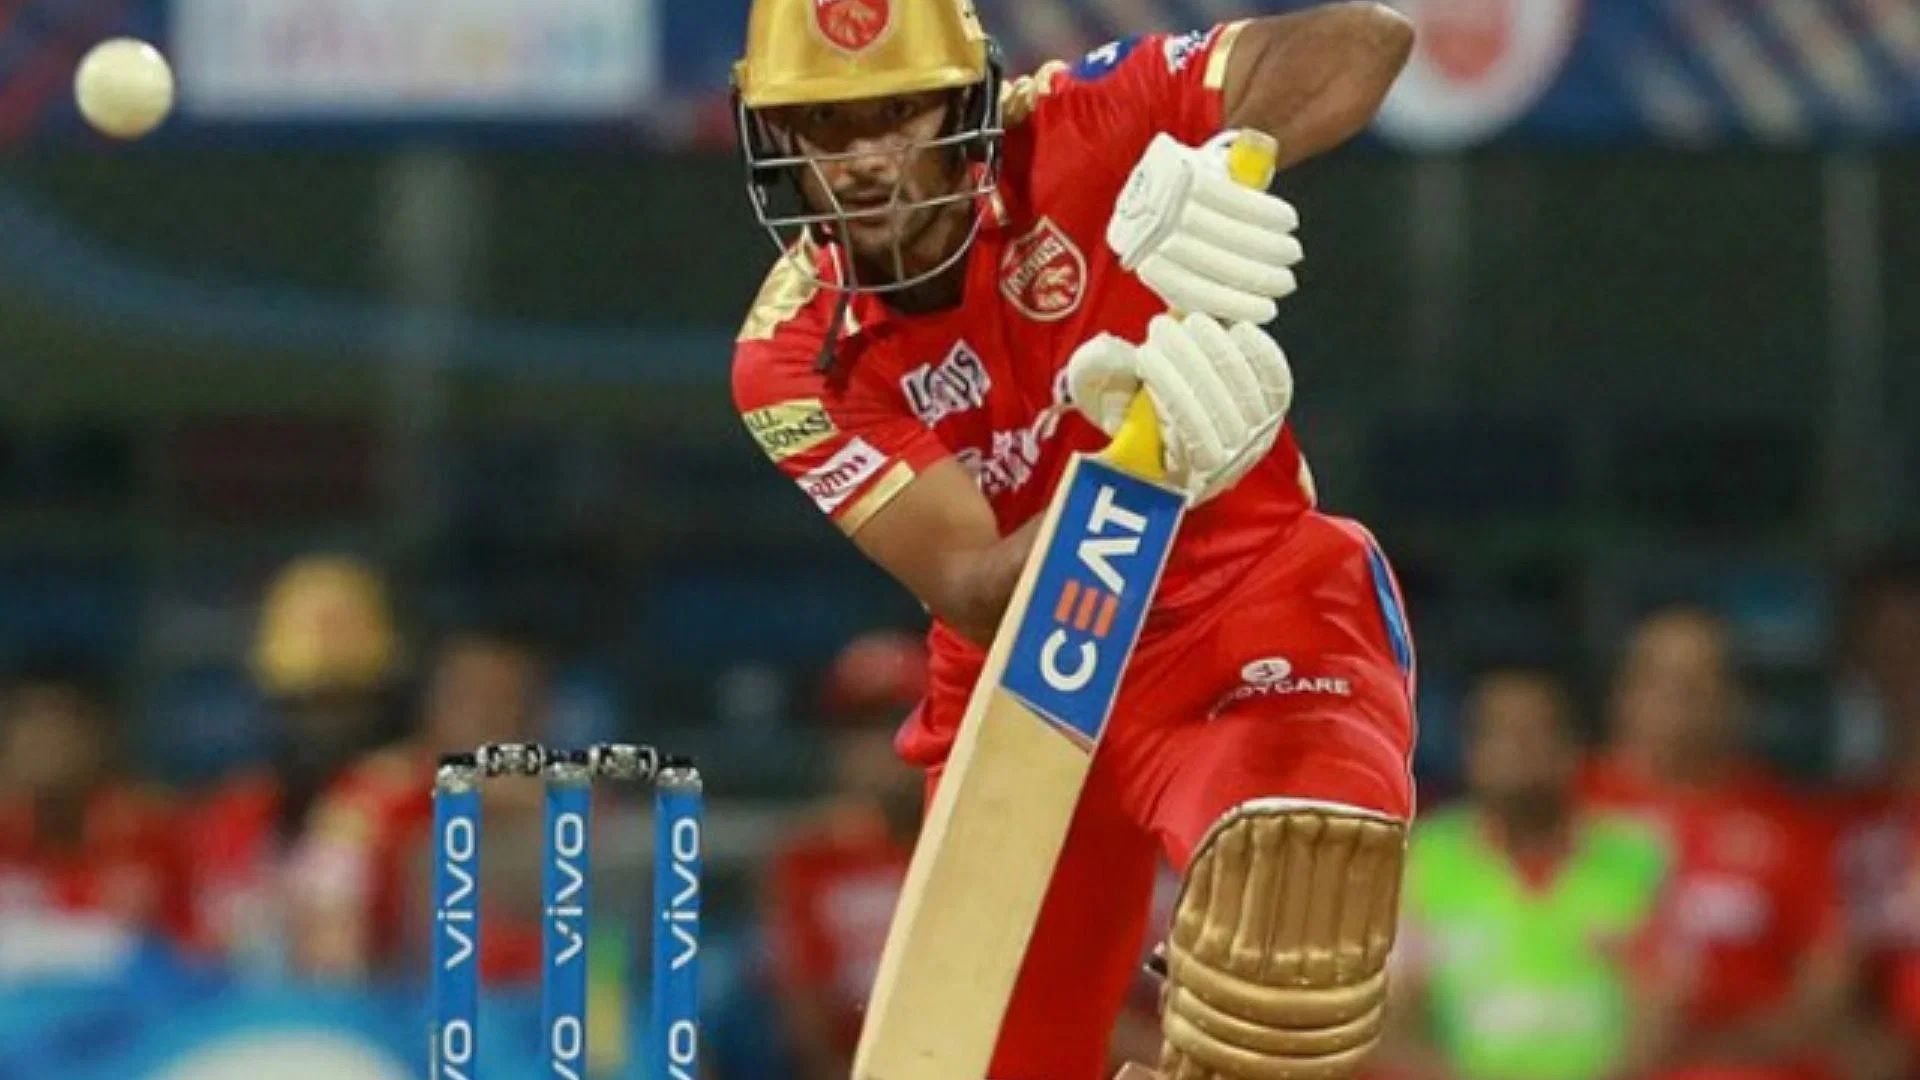 The Punjab Kings released Mayank Agarwal ahead of the IPL 2023 auction. [P/C: iplt20.com]